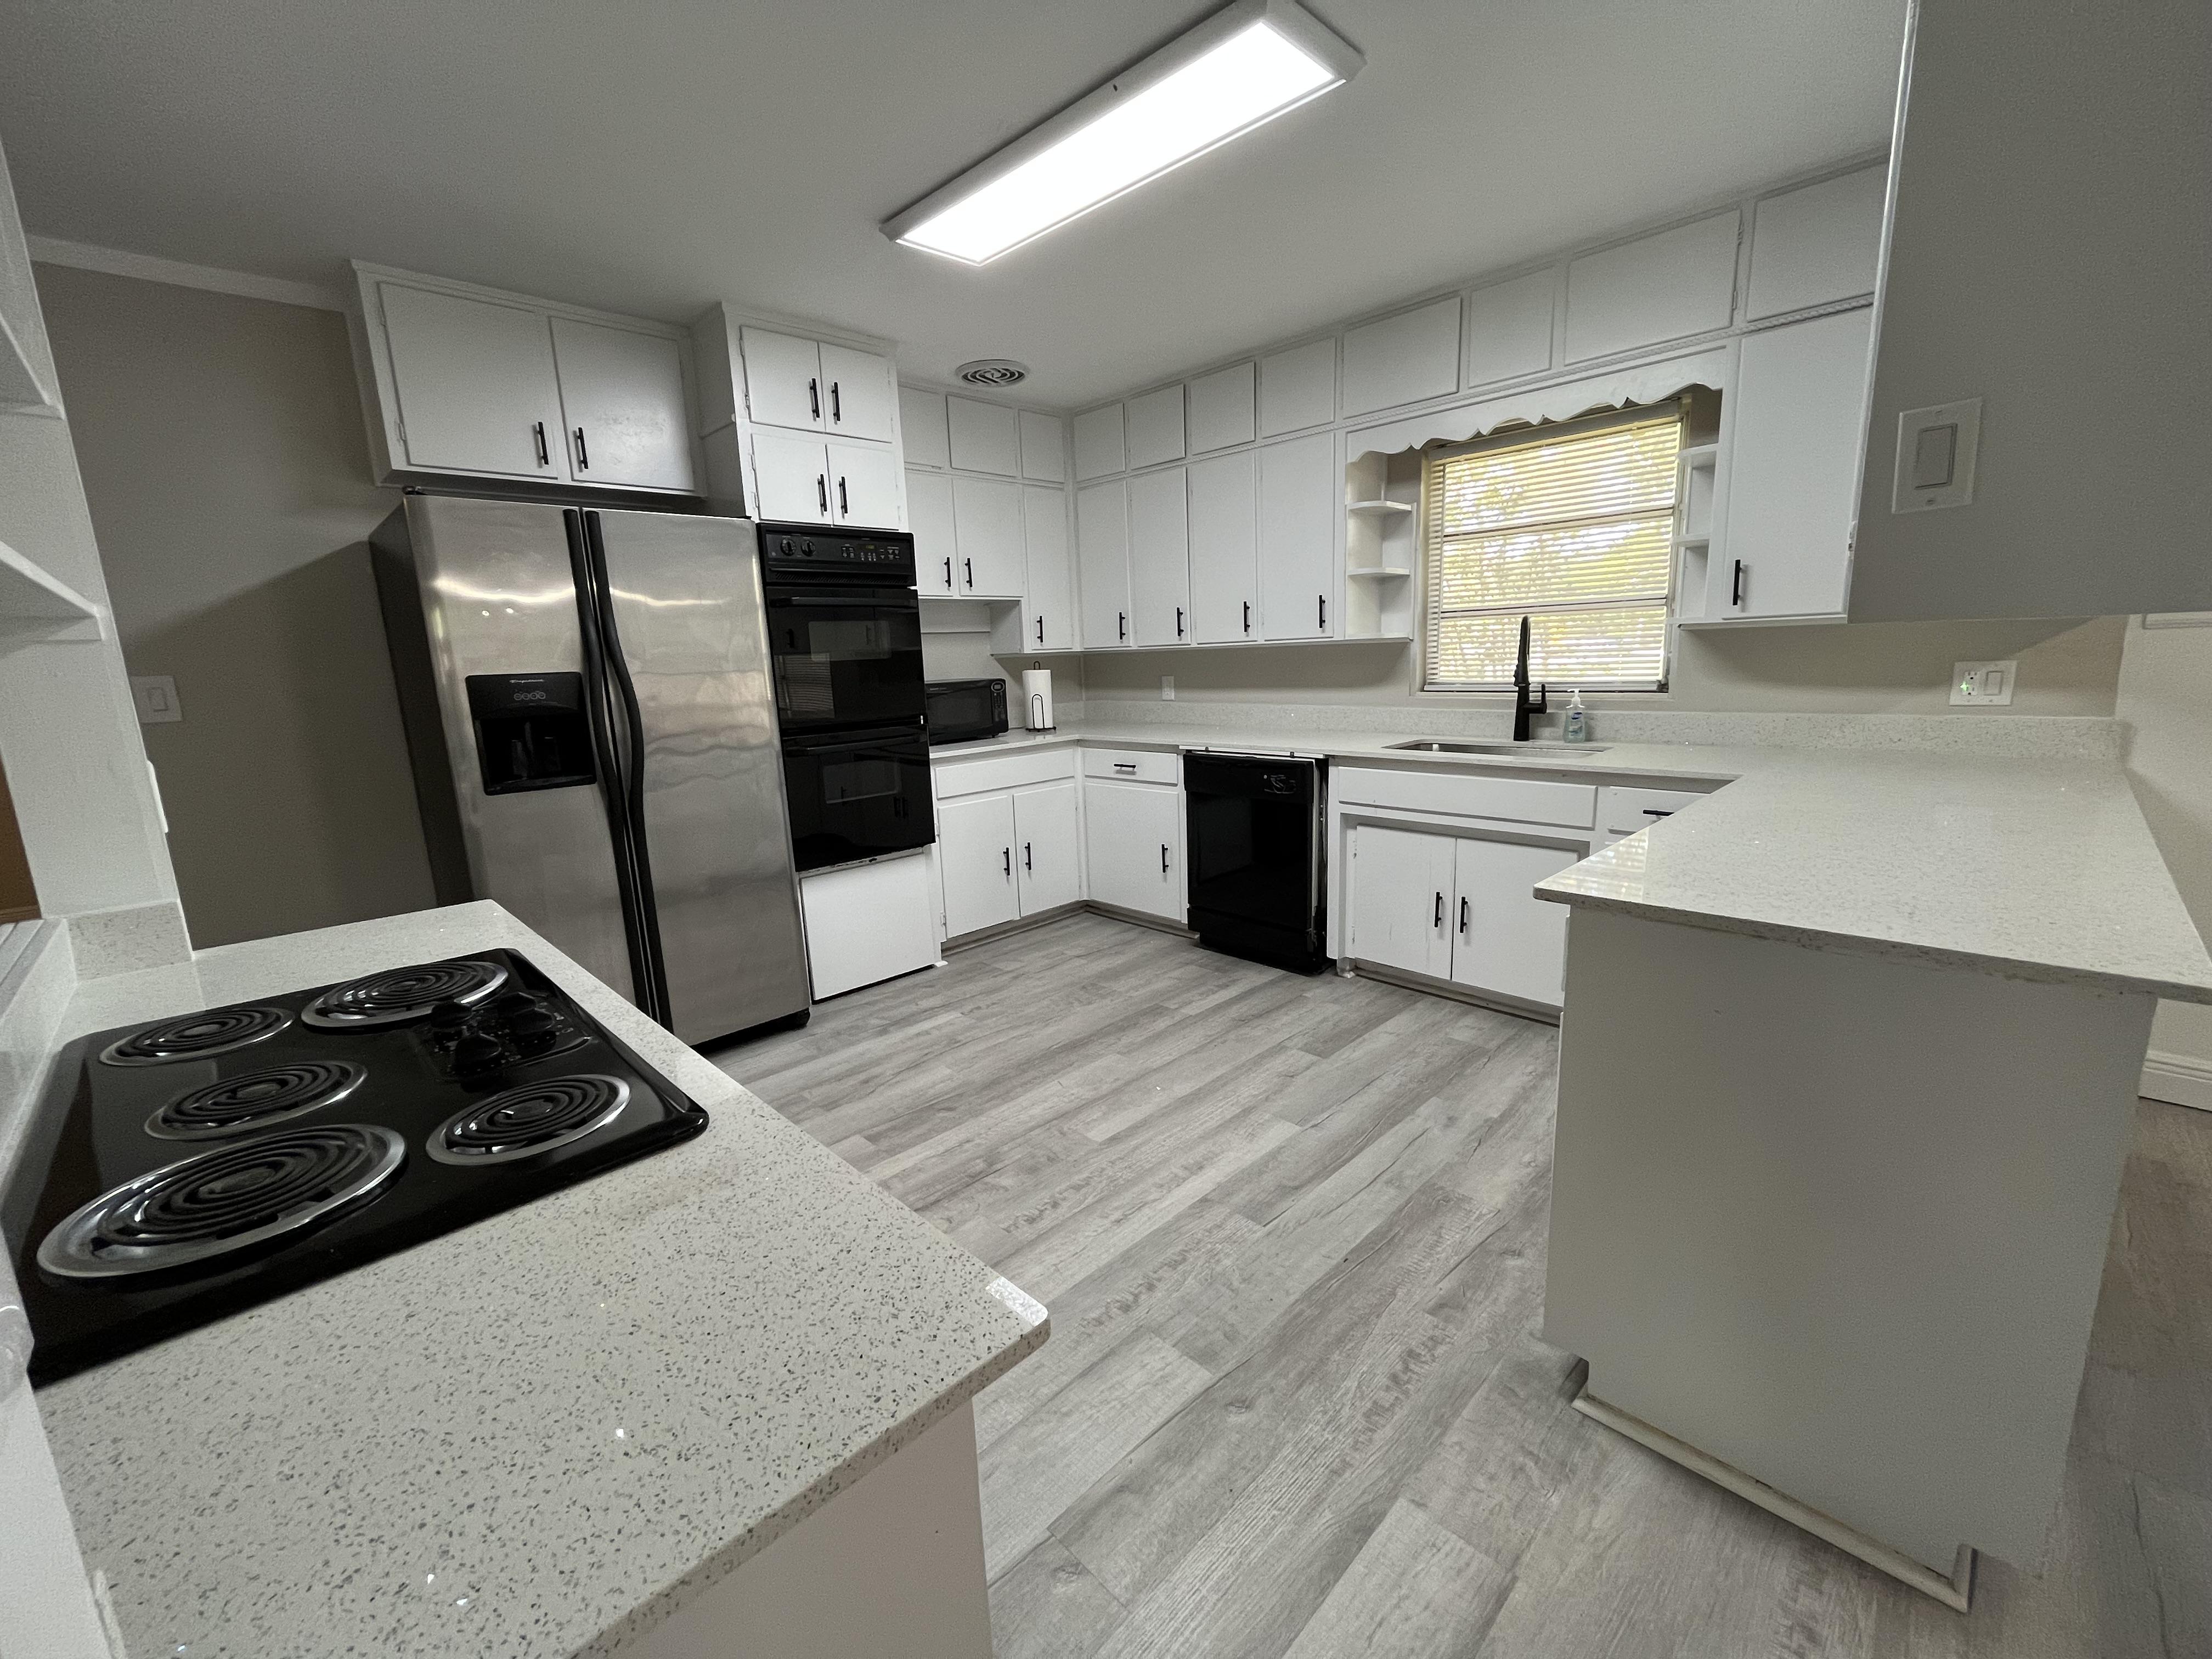 Large, clean kitchen with stainless steel fridge, double ovens, stovetop, dishwasher, and lots of storage space!